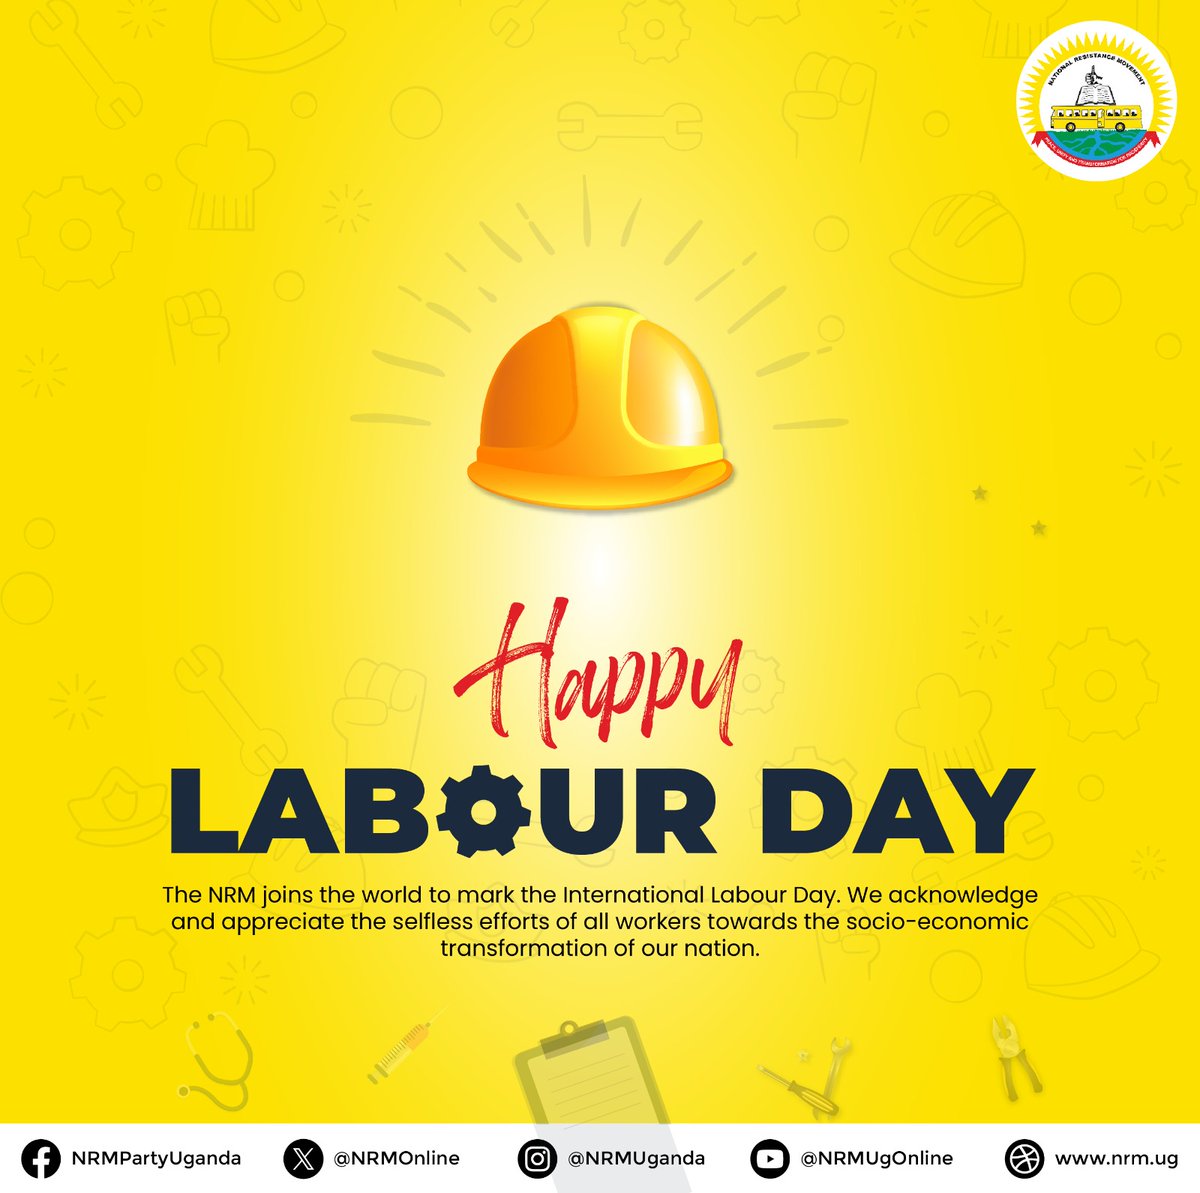 The NRM joins the world to mark the International Labour Day. We acknowledge and appreciate the selfless efforts of all workers towards the socio-economic transformation of our nation. His Excellency the President also NRM National Chairman, Gen (Rtd) @KagutaMuseveni will